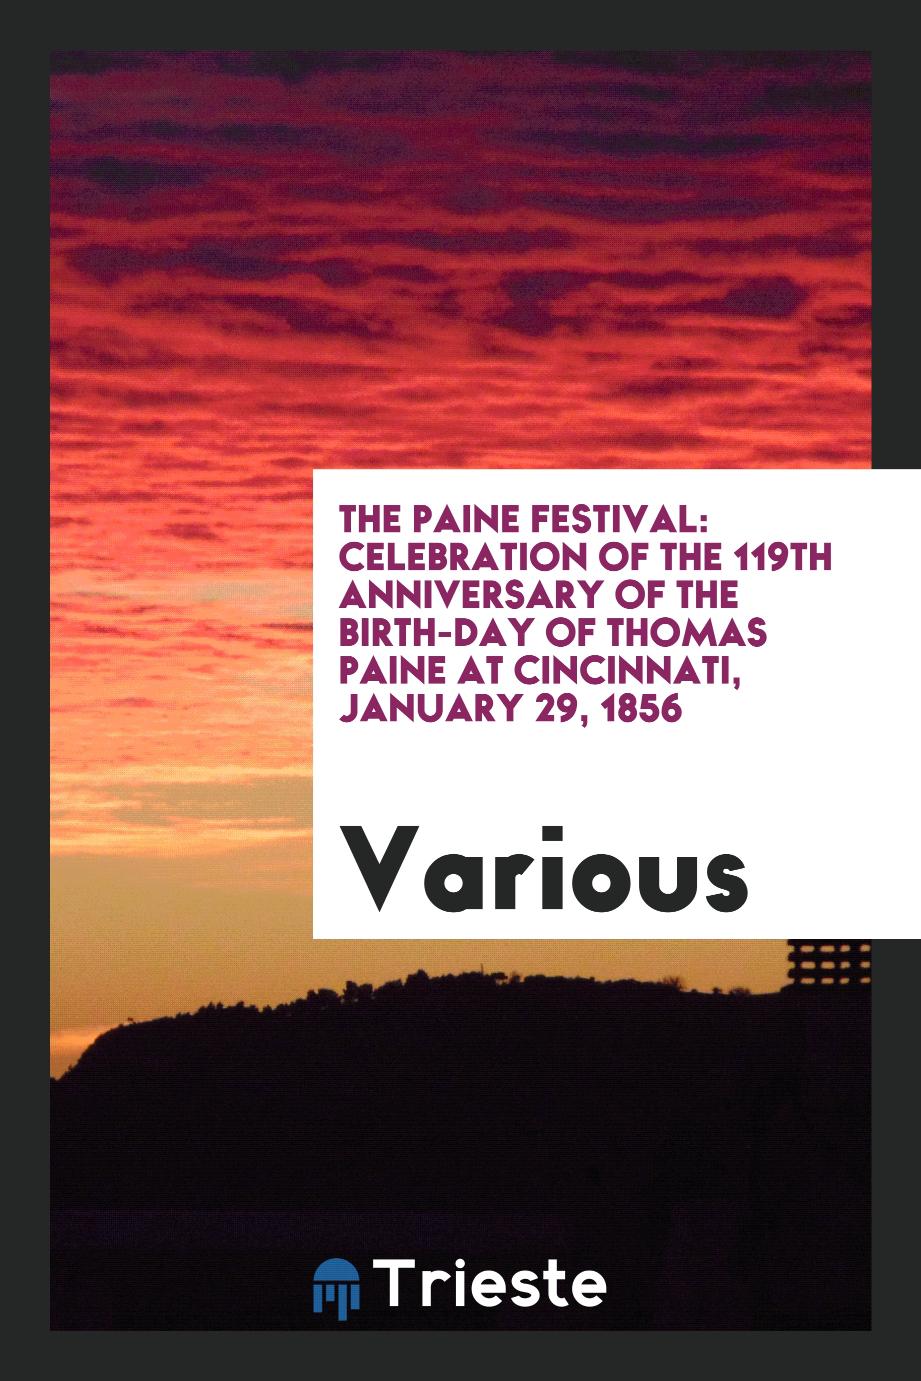 The Paine Festival: Celebration of the 119th Anniversary of the Birth-day of Thomas Paine at Cincinnati, January 29, 1856